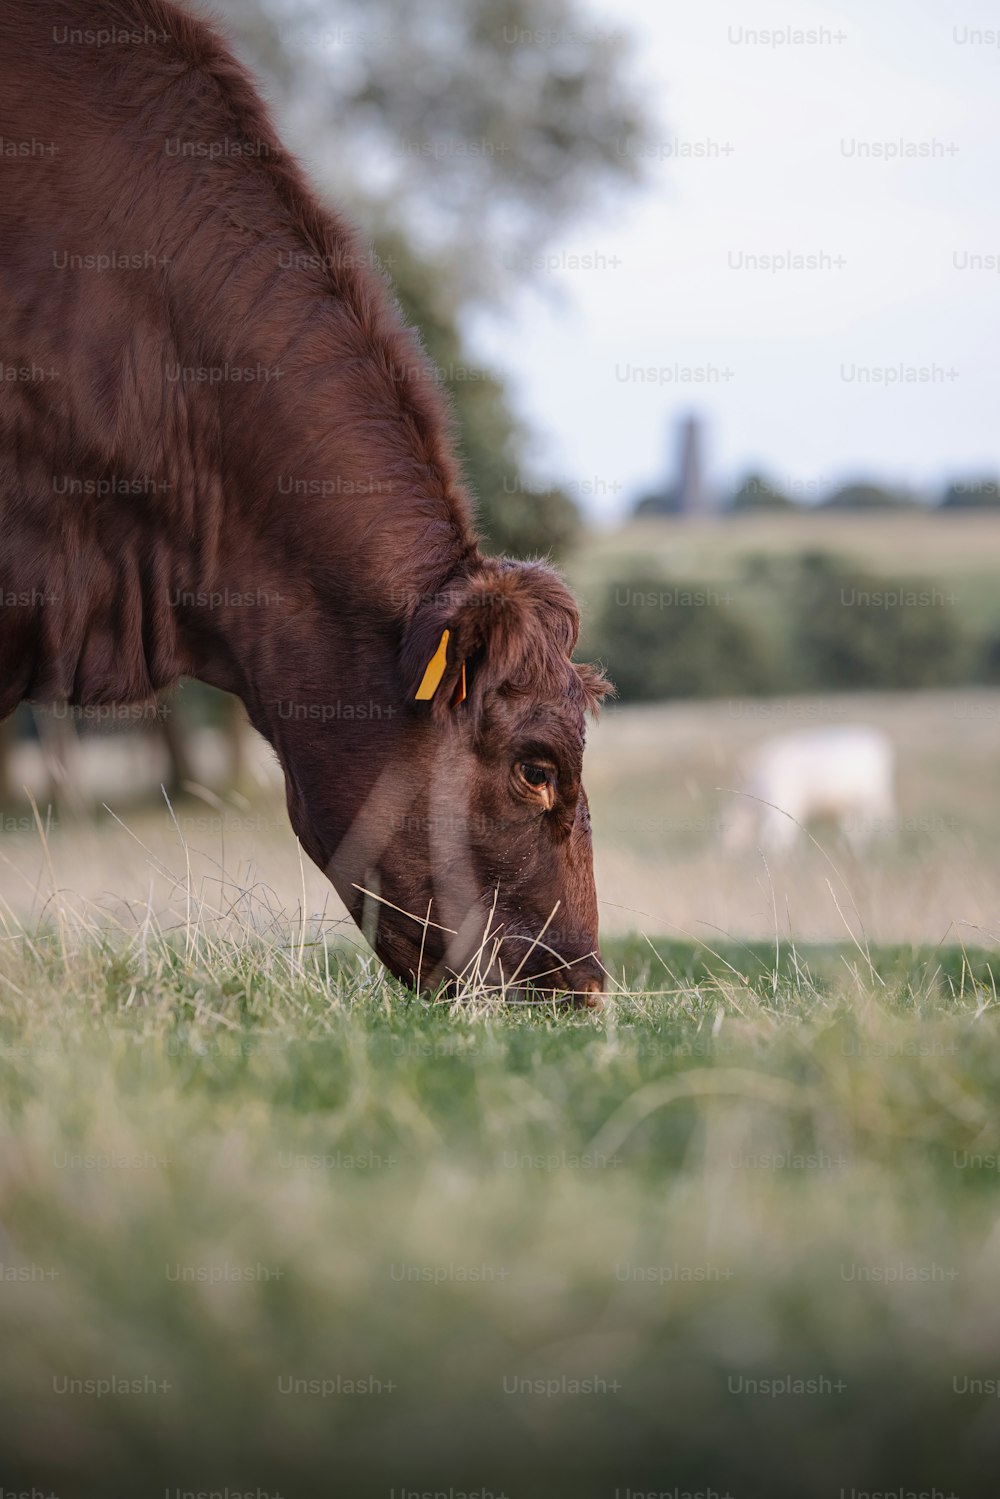 a brown cow eating grass in a field